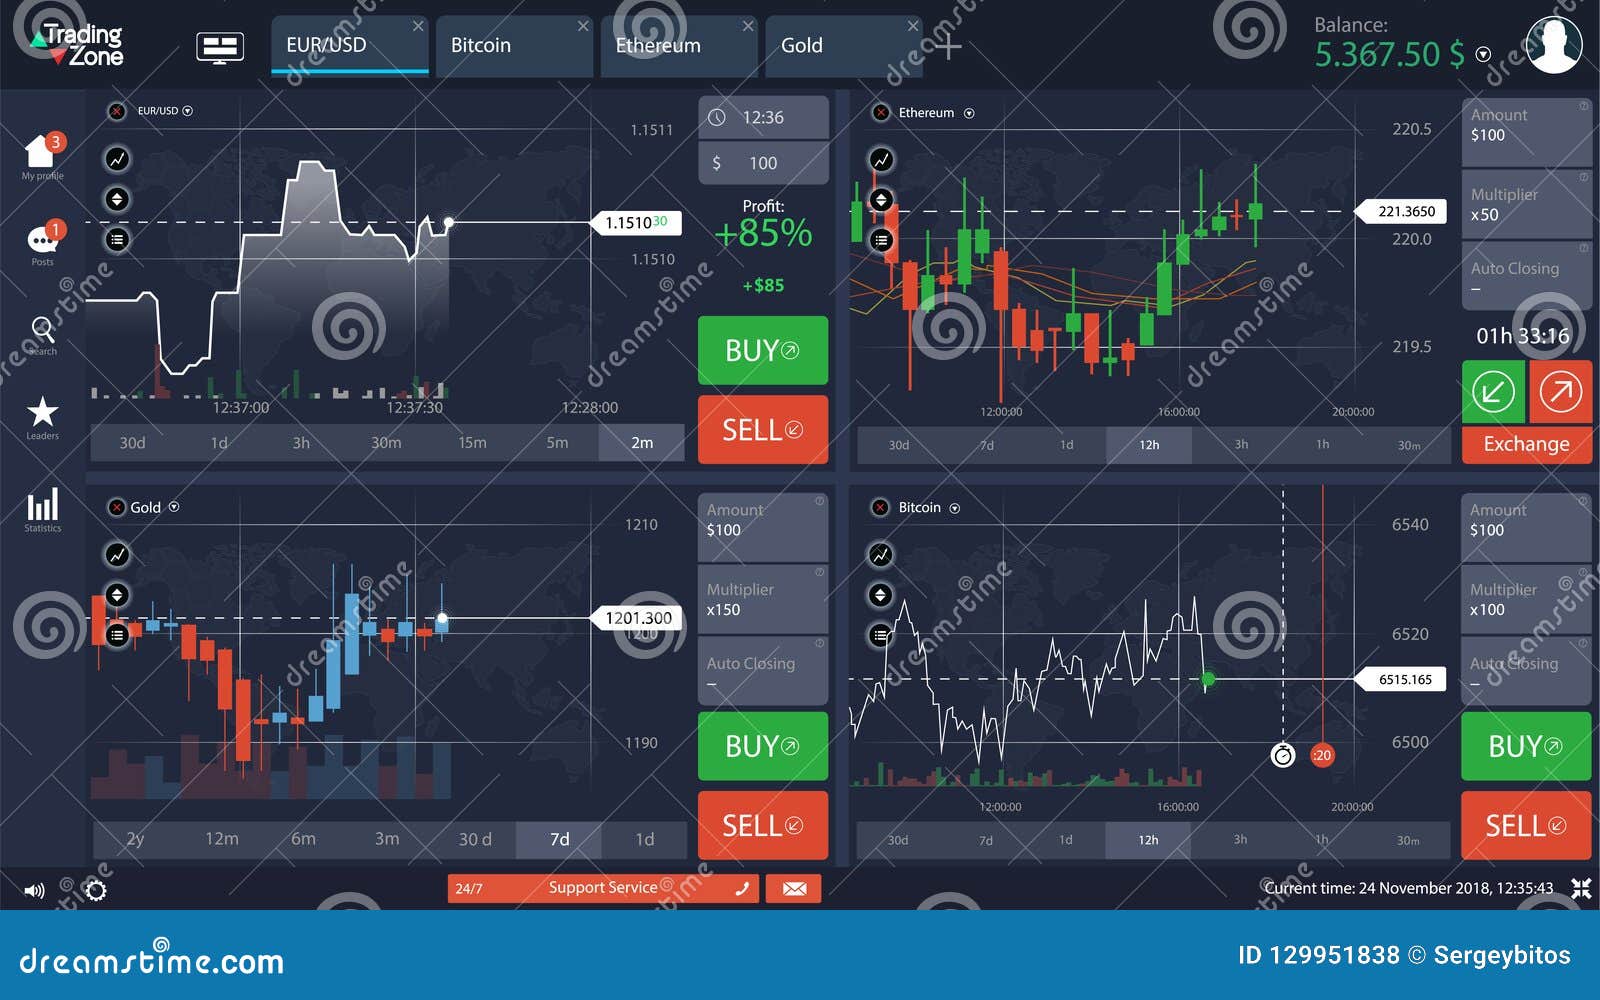 Best sites to trade binary options